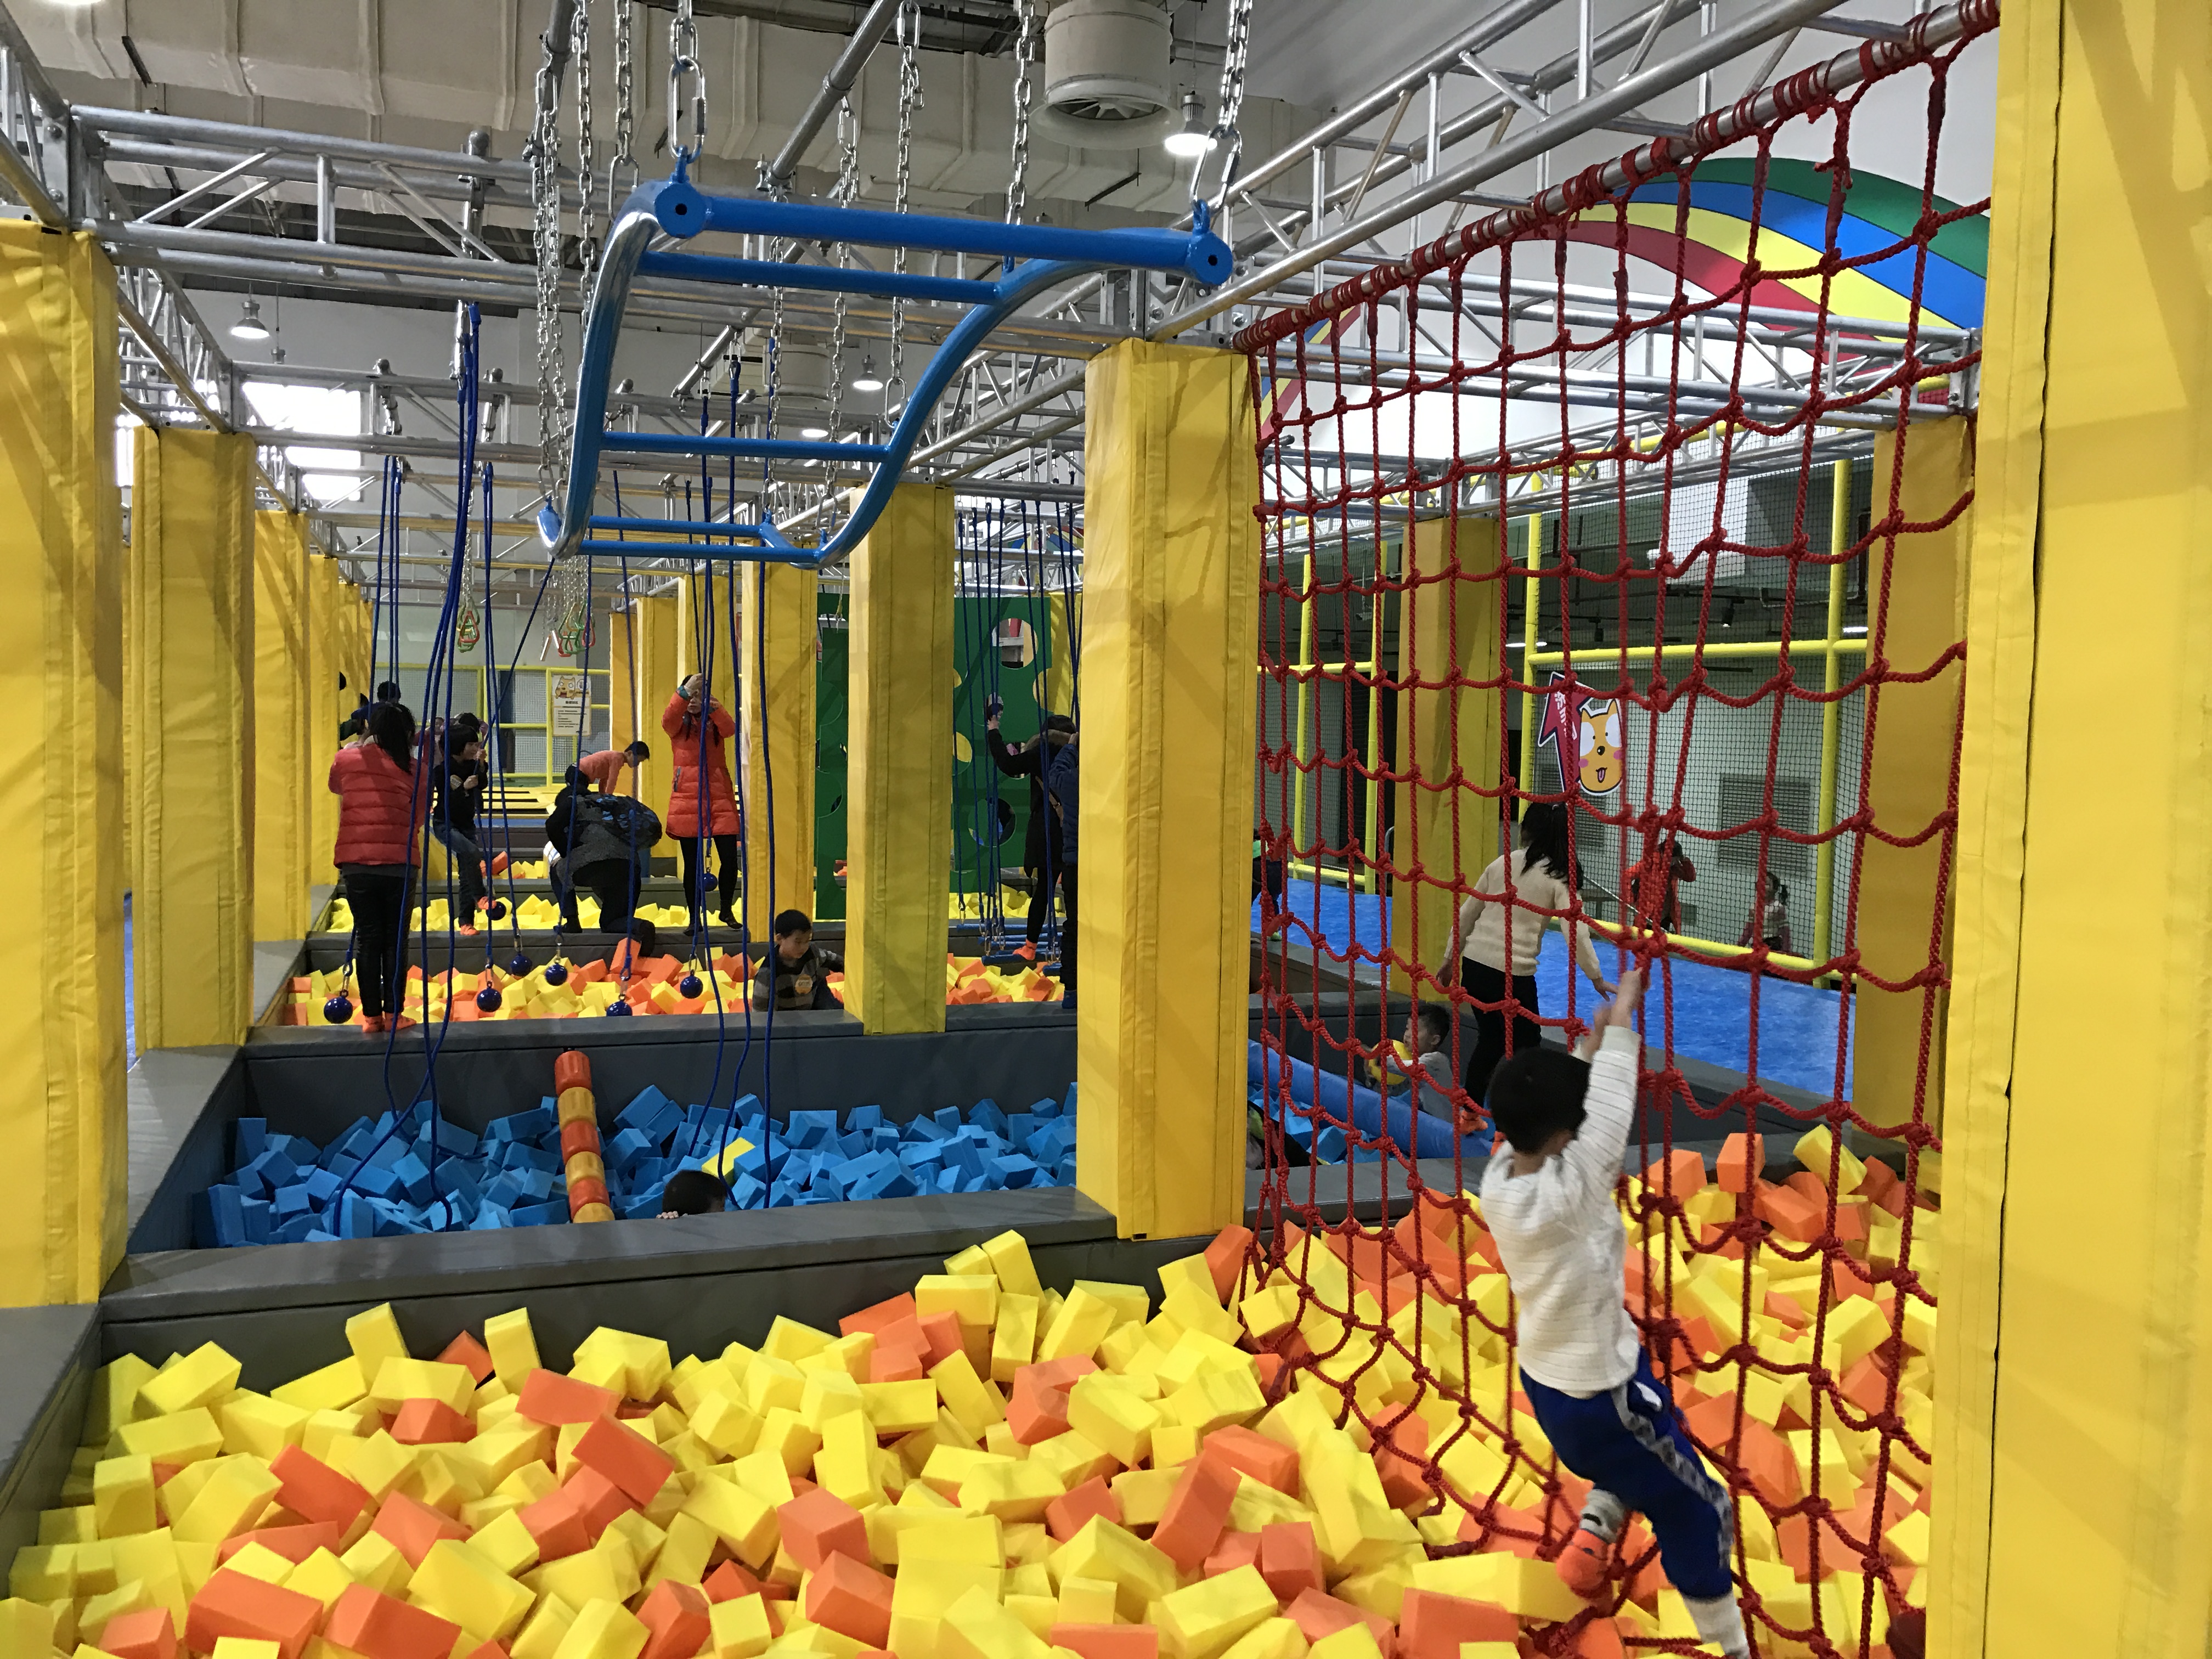 what is indoor playground equipment made of?